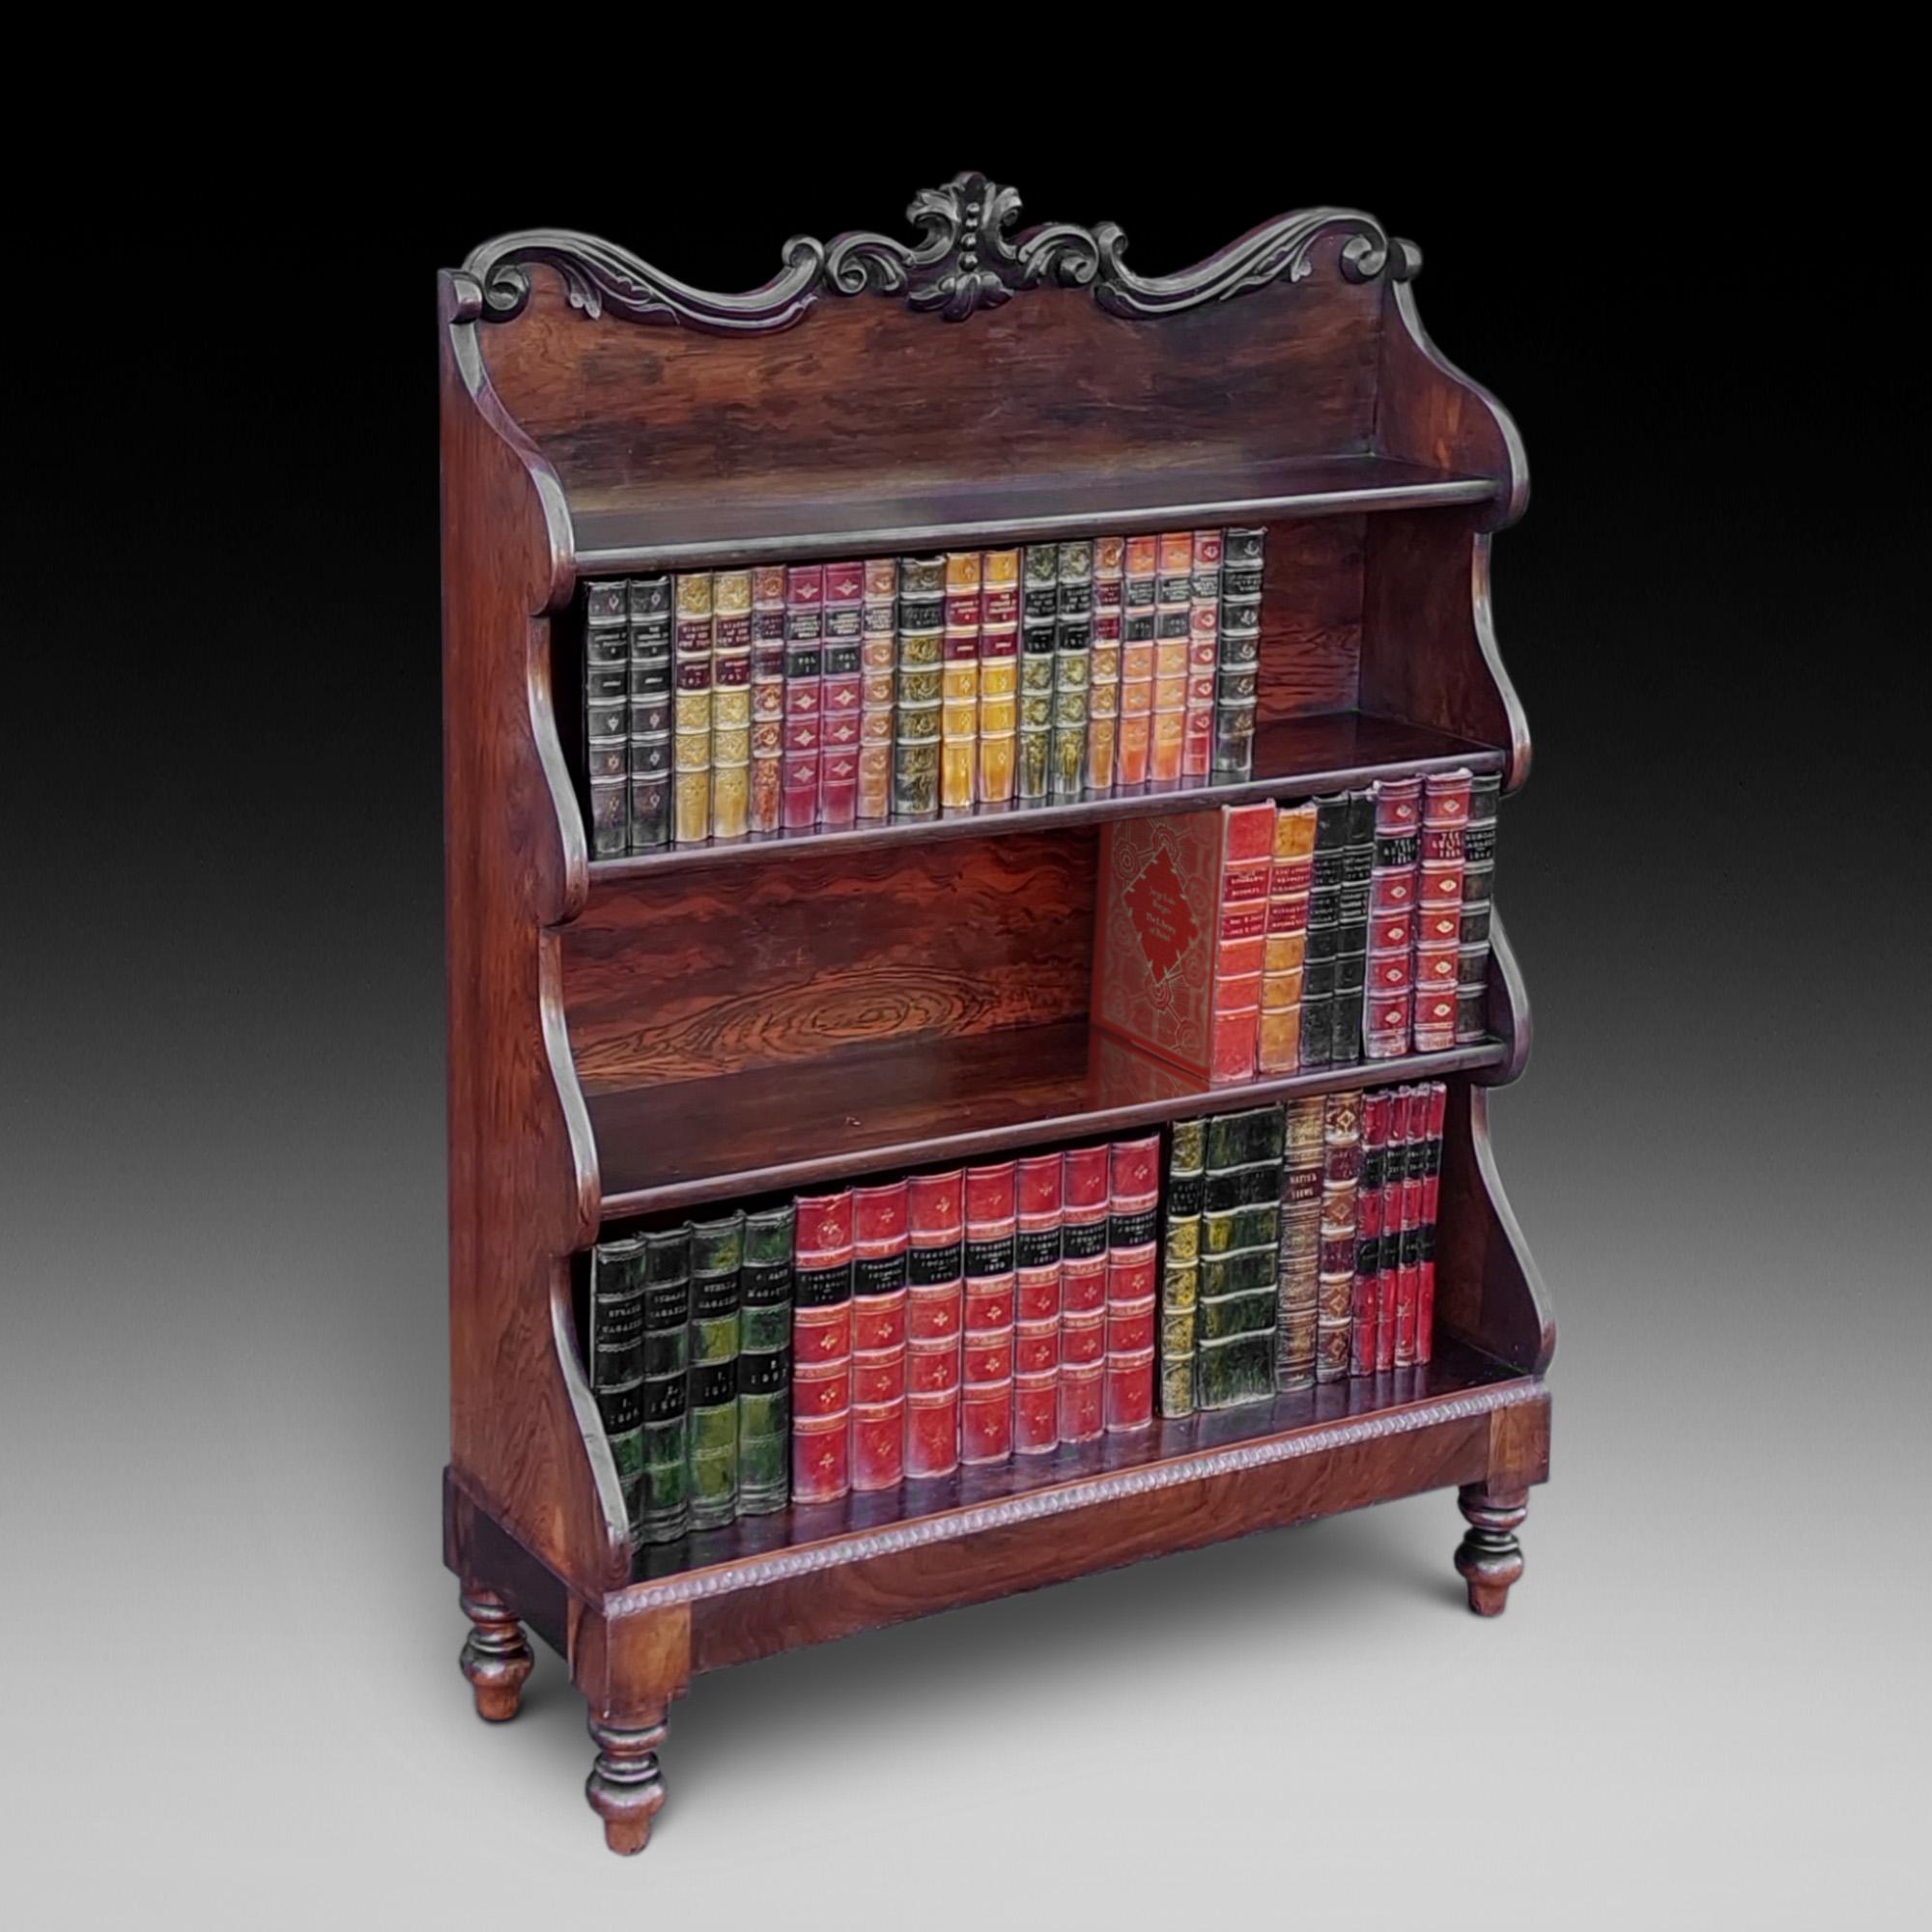 William IV Rosewood & Faux Rosewood Waterfall Dwarf Bookcase with carved foliage gallery and gadroon moulded base on turned feet bun feet - 36